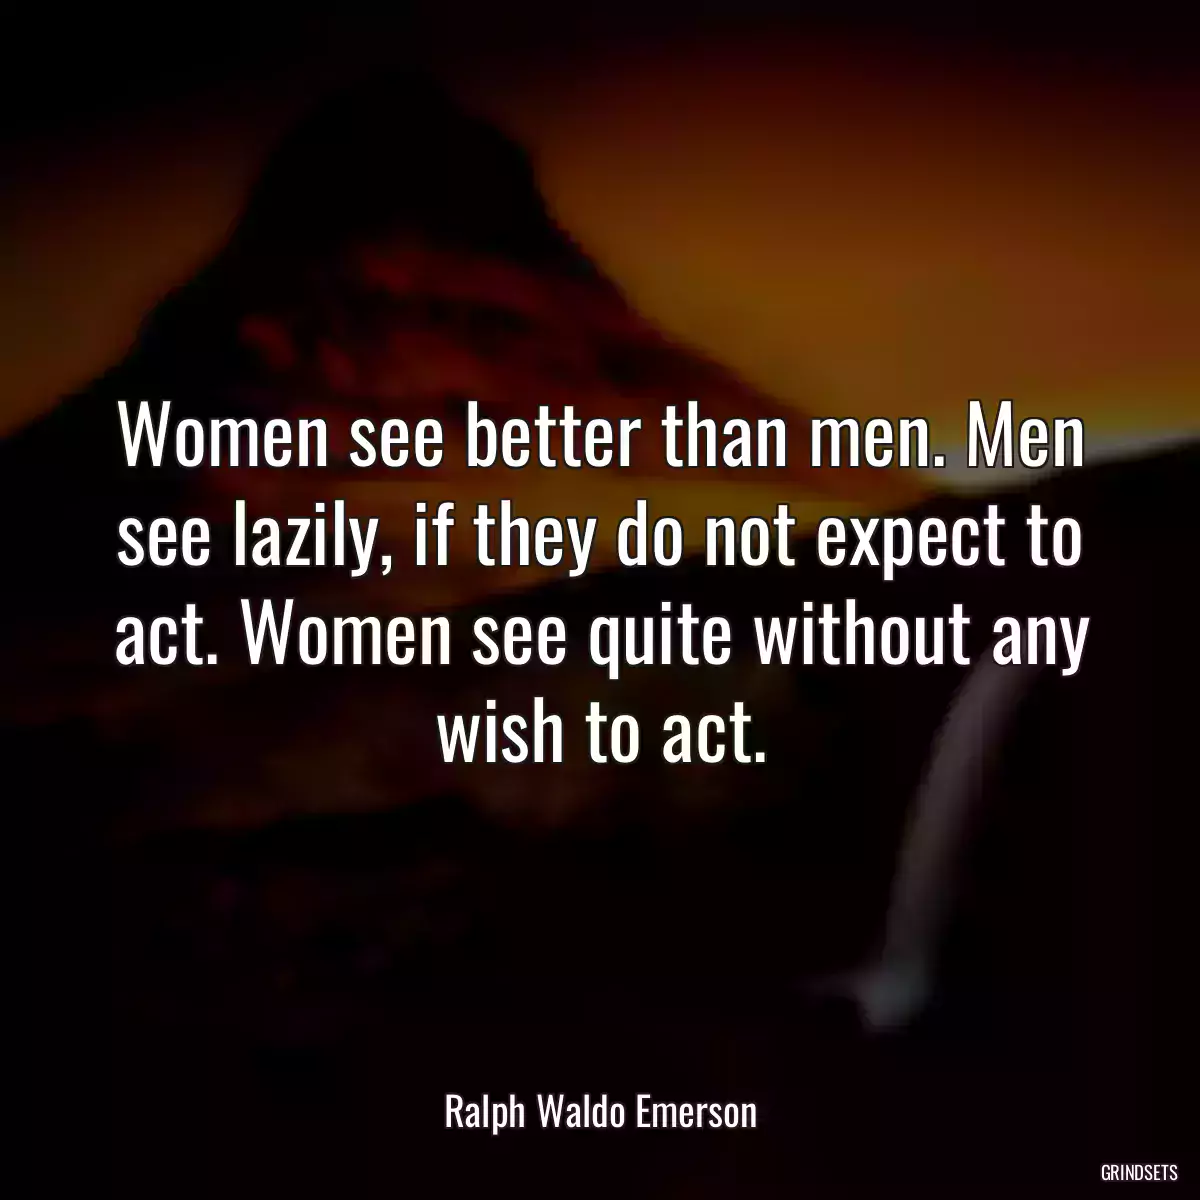 Women see better than men. Men see lazily, if they do not expect to act. Women see quite without any wish to act.